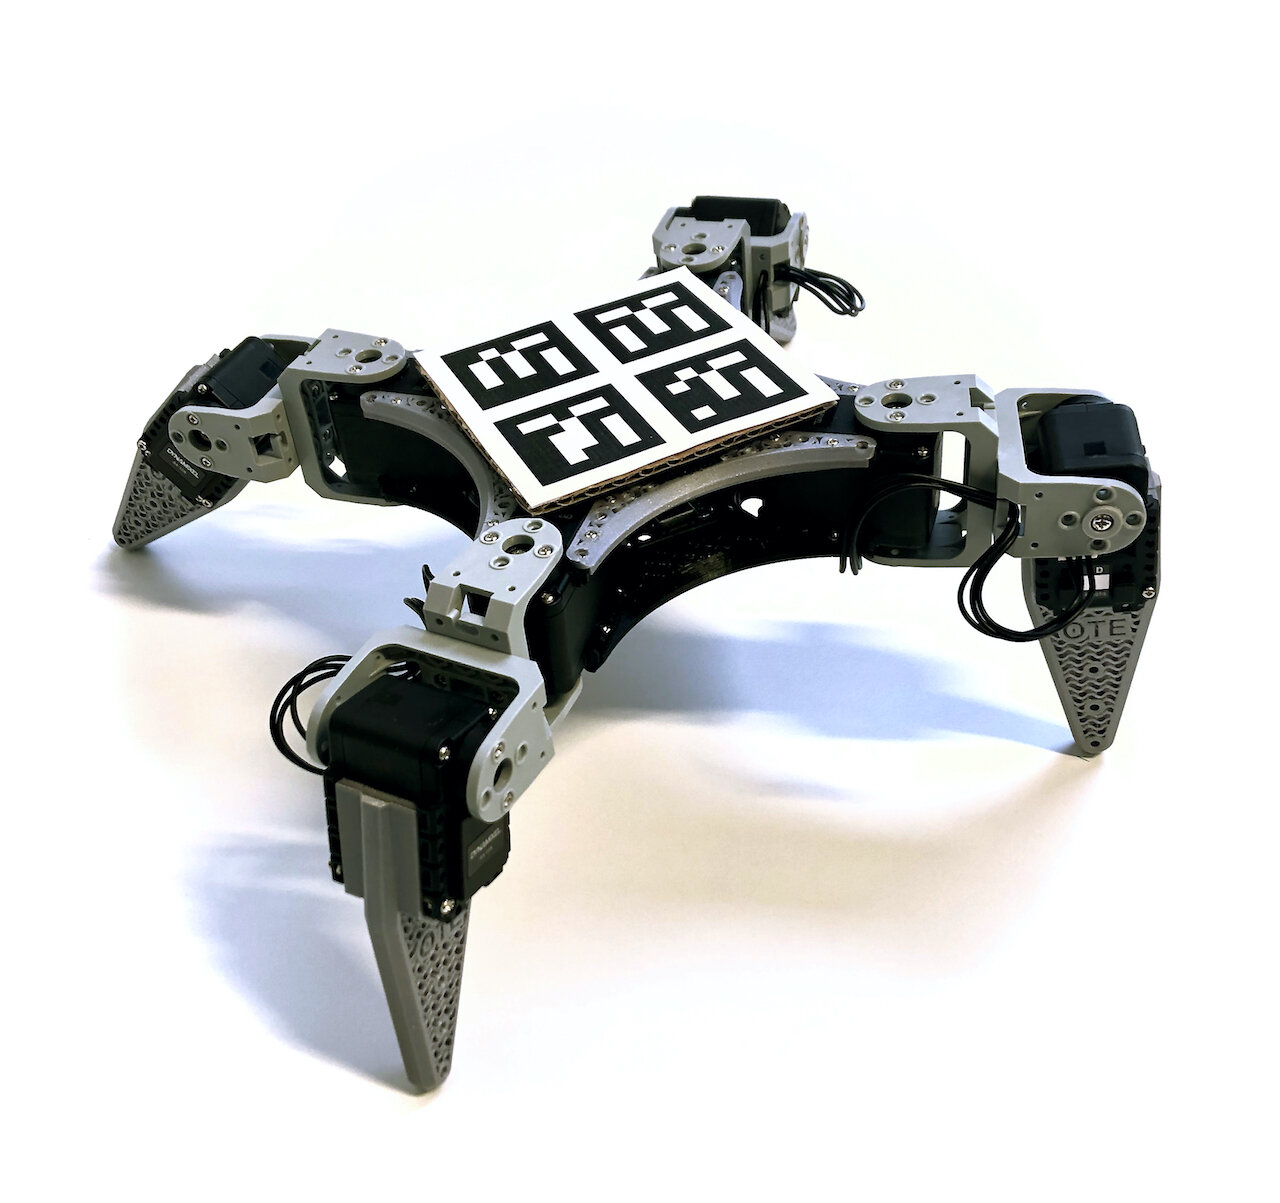 RealAnt: A low-cost quadruped robot that can learn via reinforcement learning